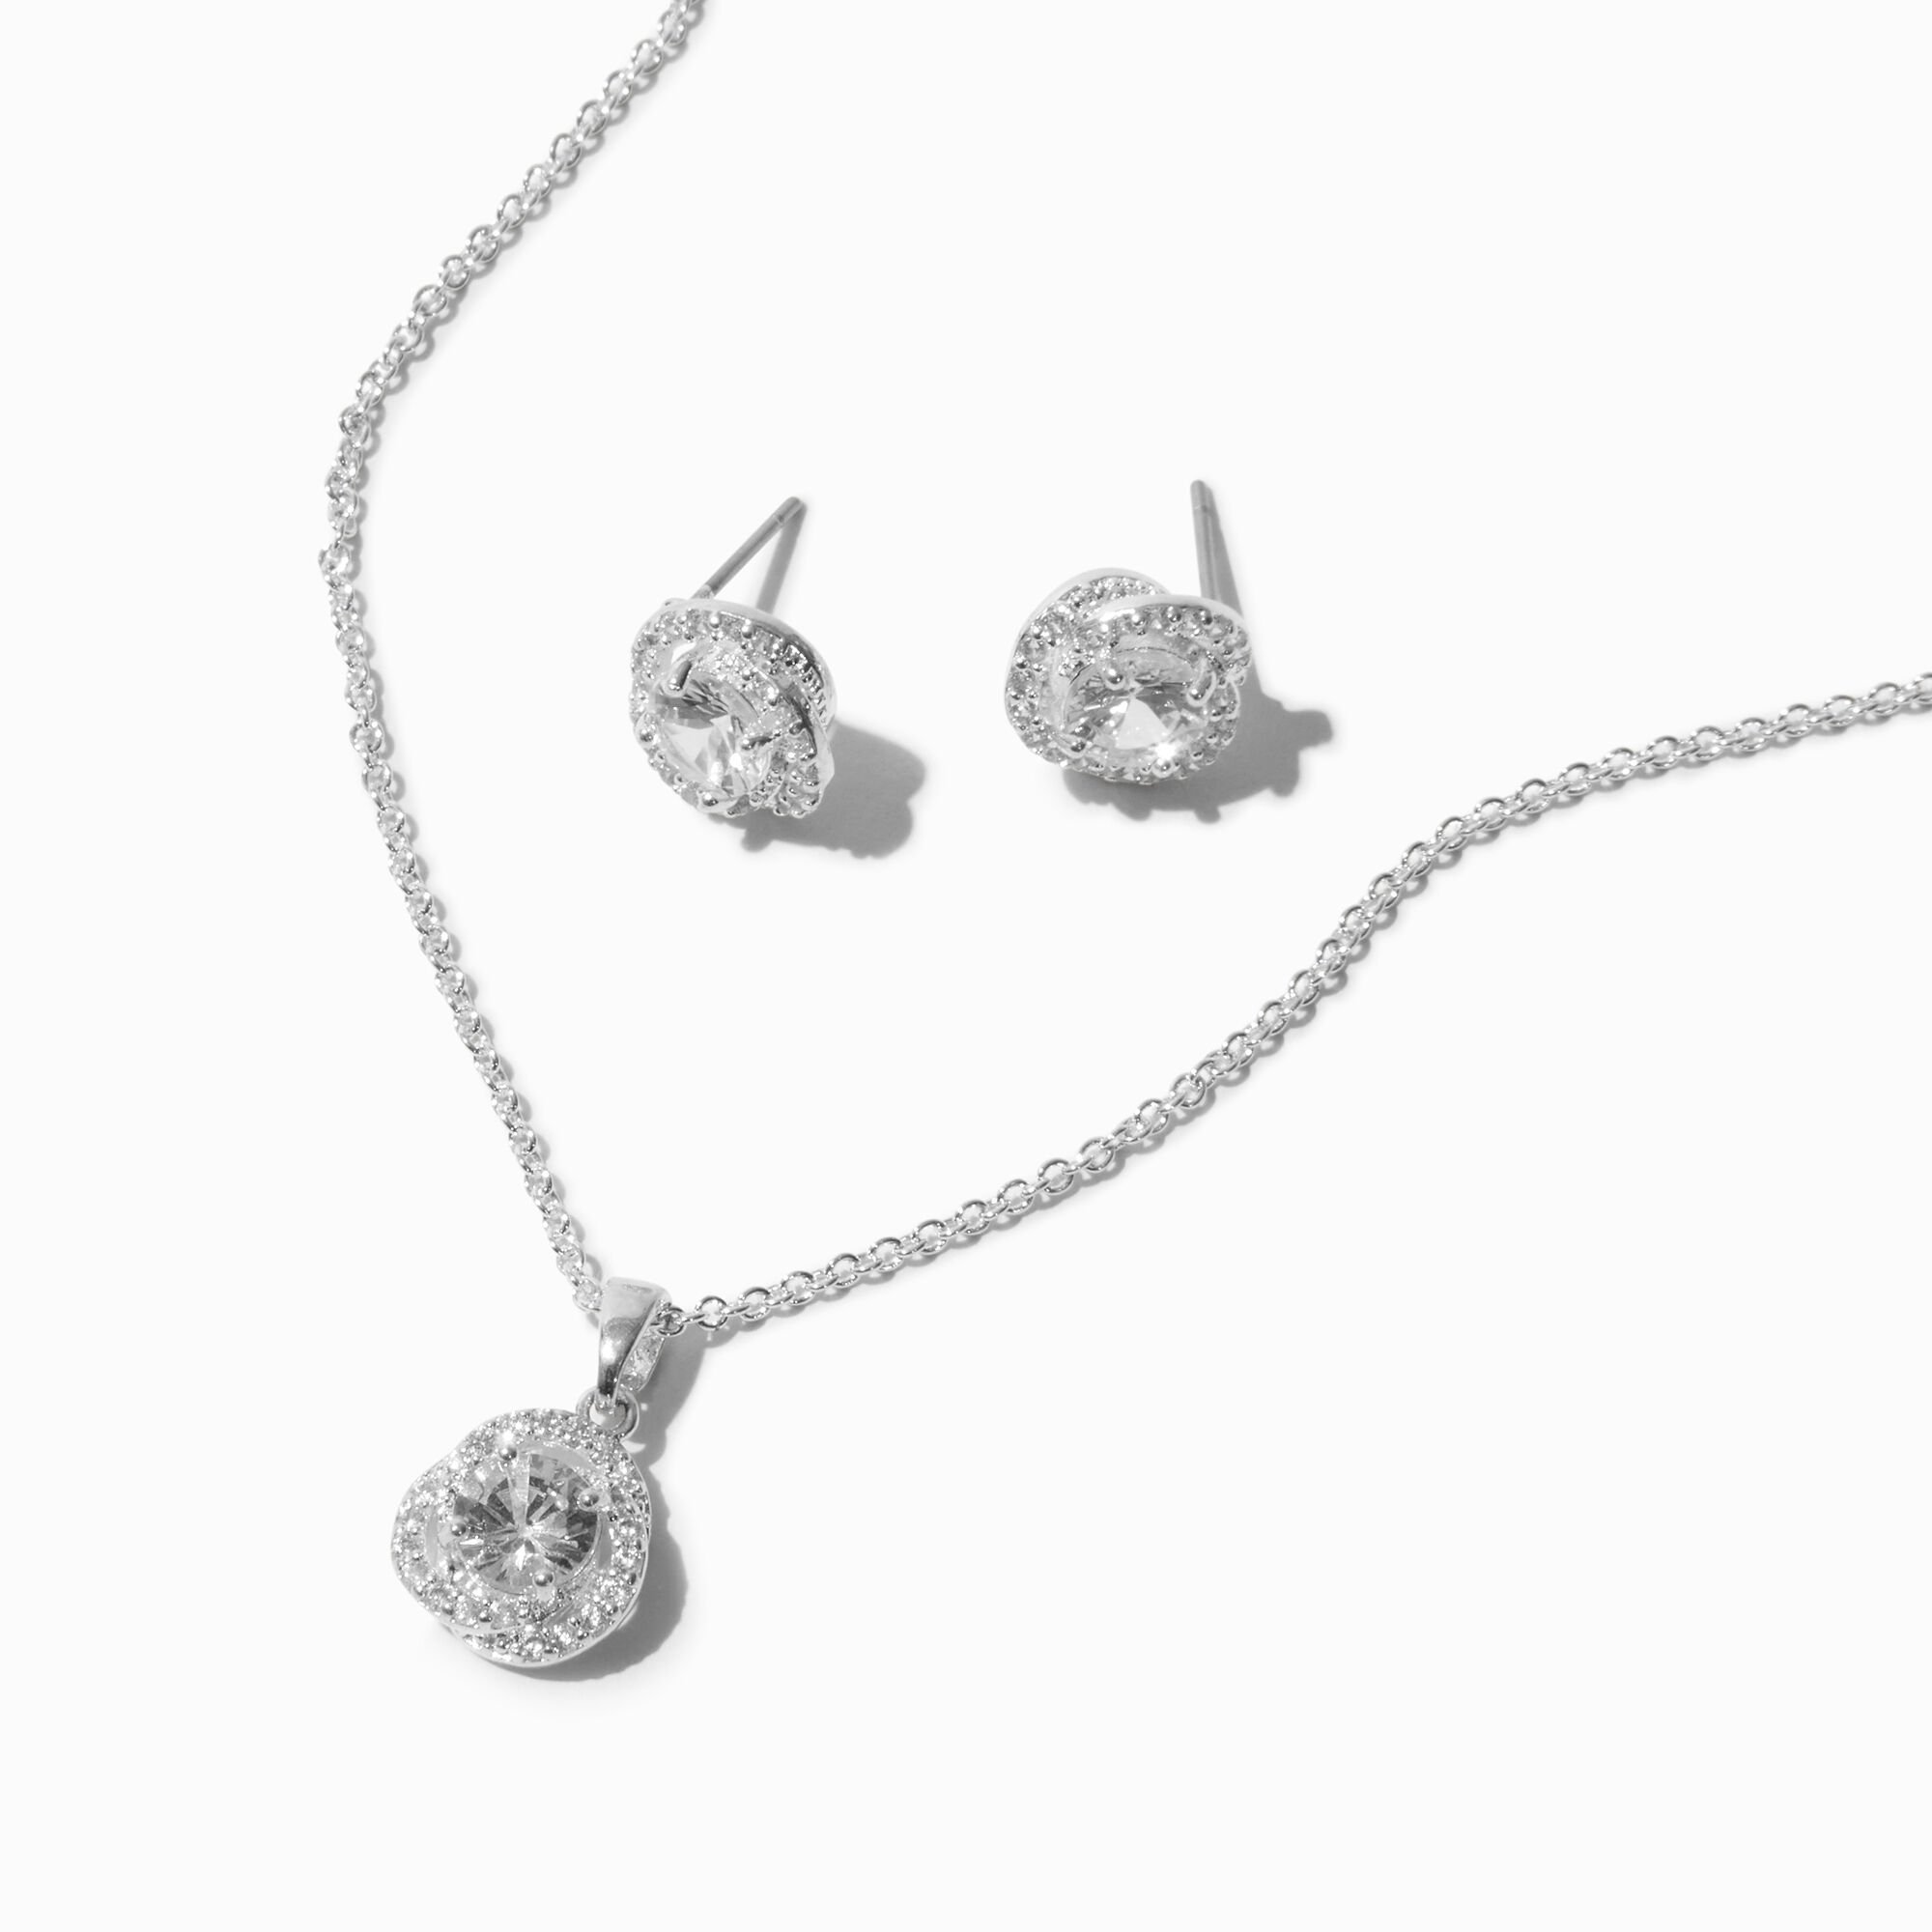 View Claires Cubic Zirconia Halo Knot Pendant Necklace Stud Earrings Set 2 Pack Silver information